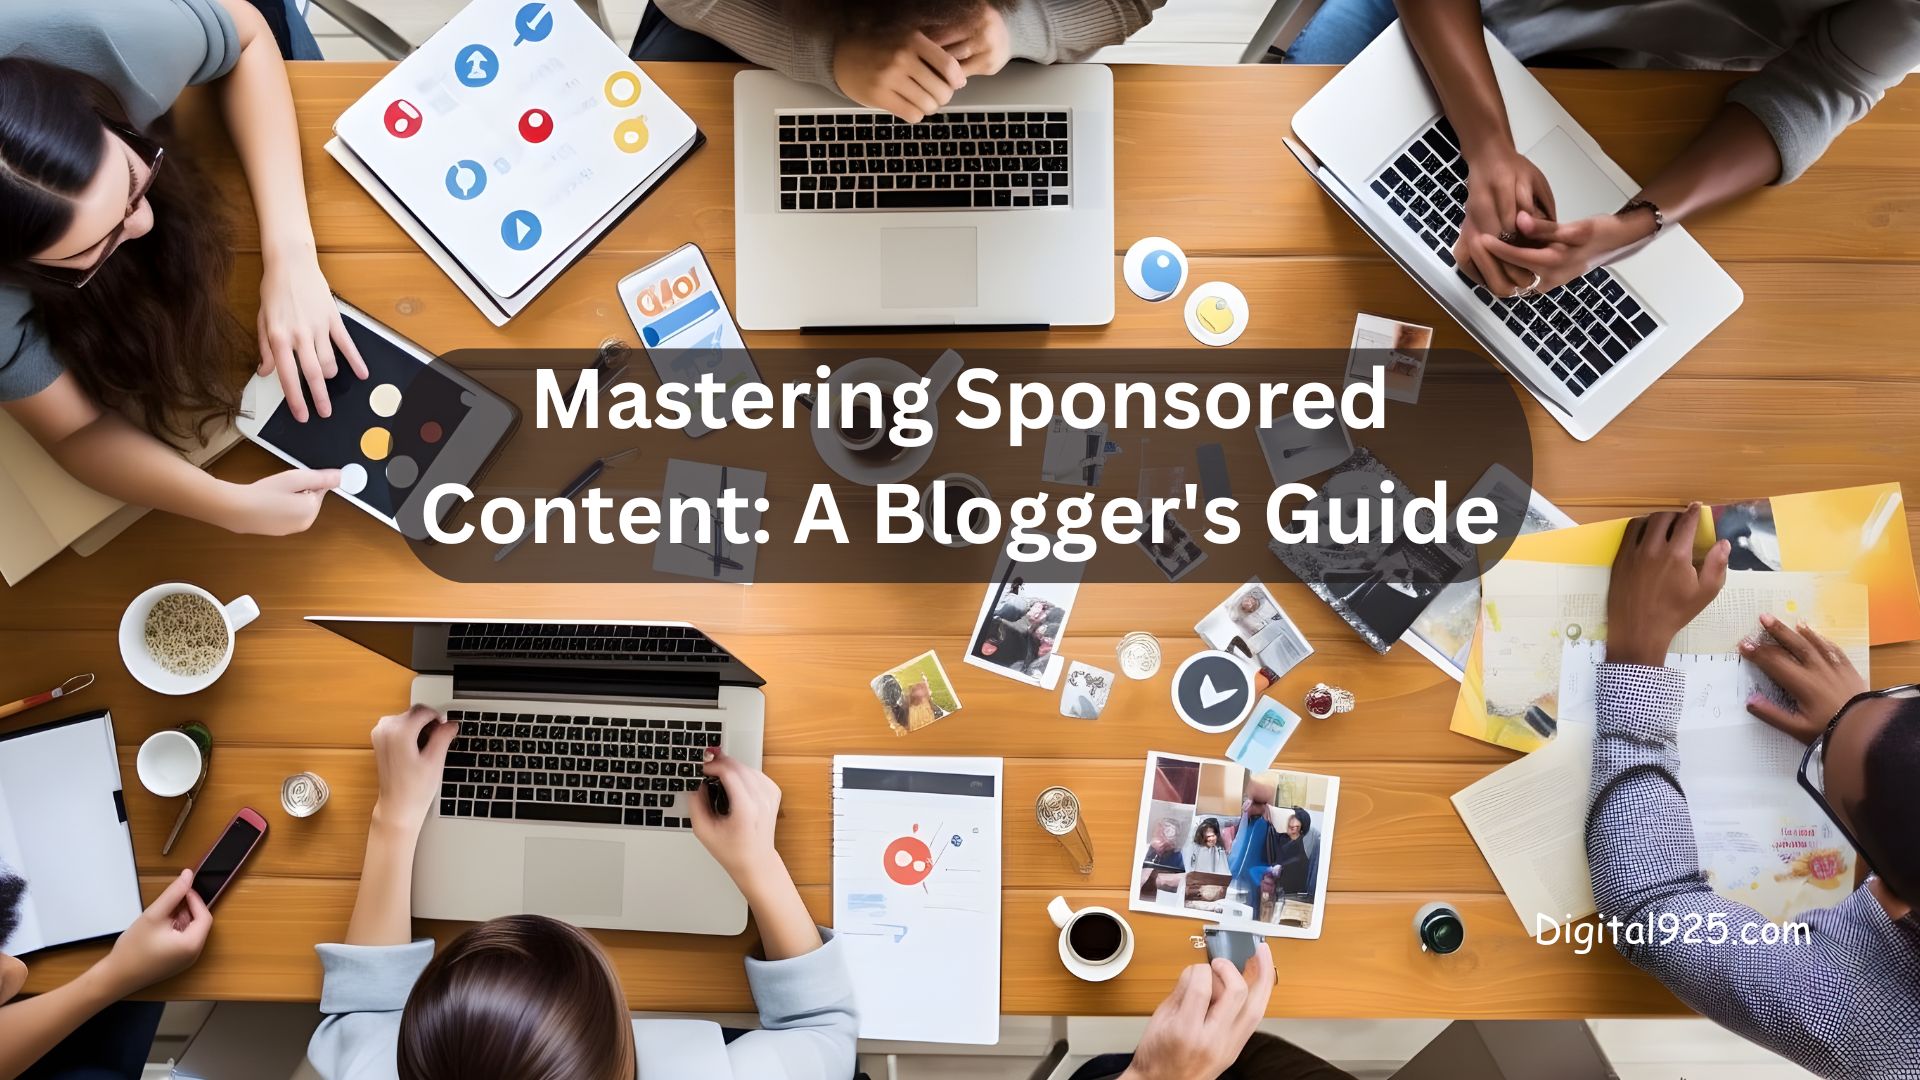 Mastering Sponsored Content: A Blogger's Guide